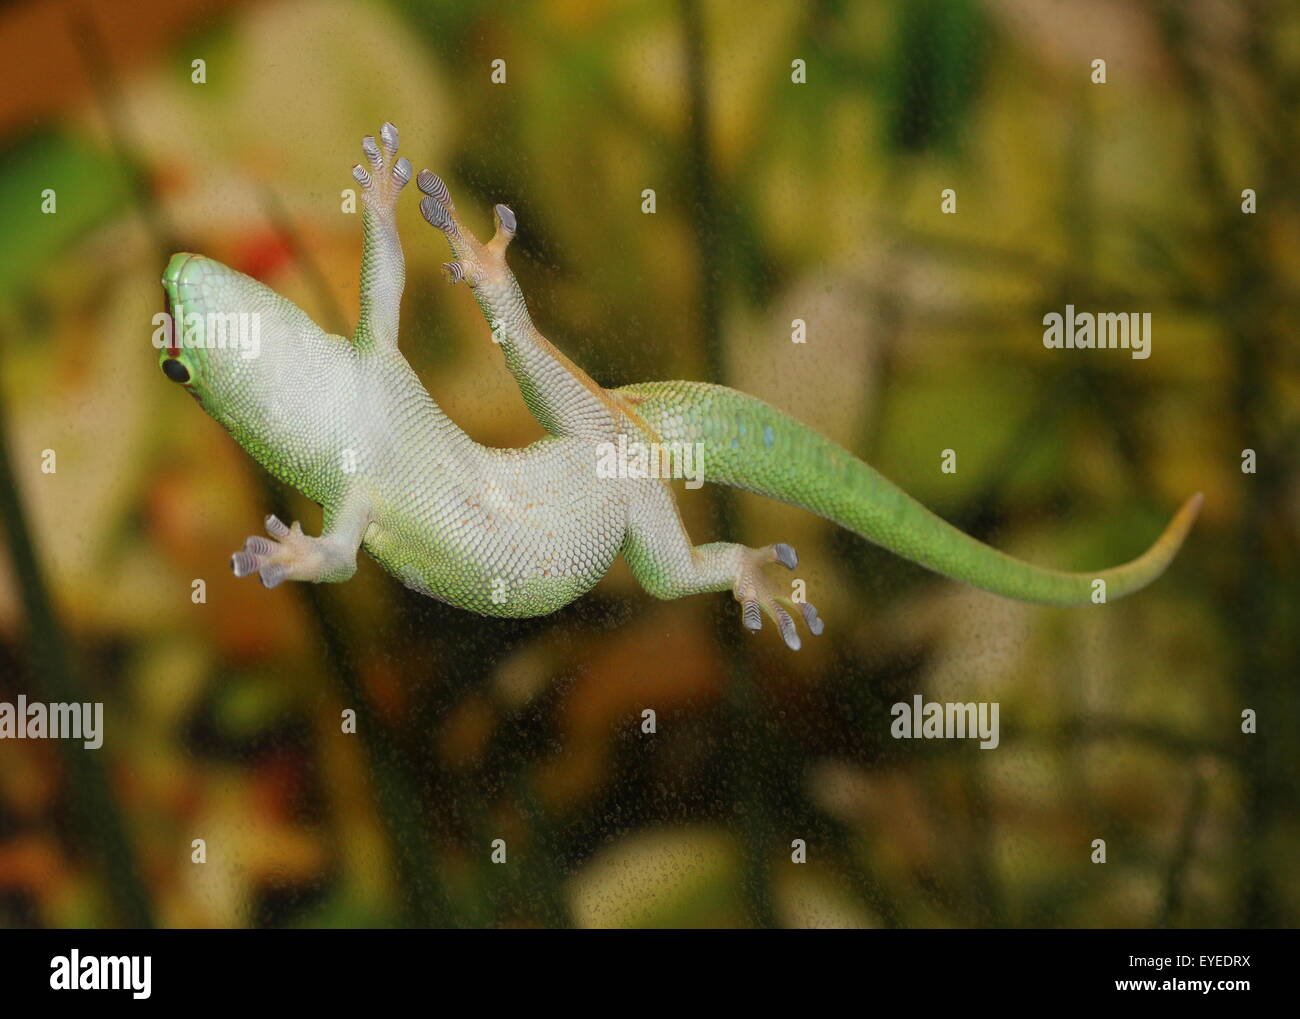 Green Madagascar Day Gecko (Phelsuma madagascariensis) clinging to a glass window with his sticky toe pads Stock Photo